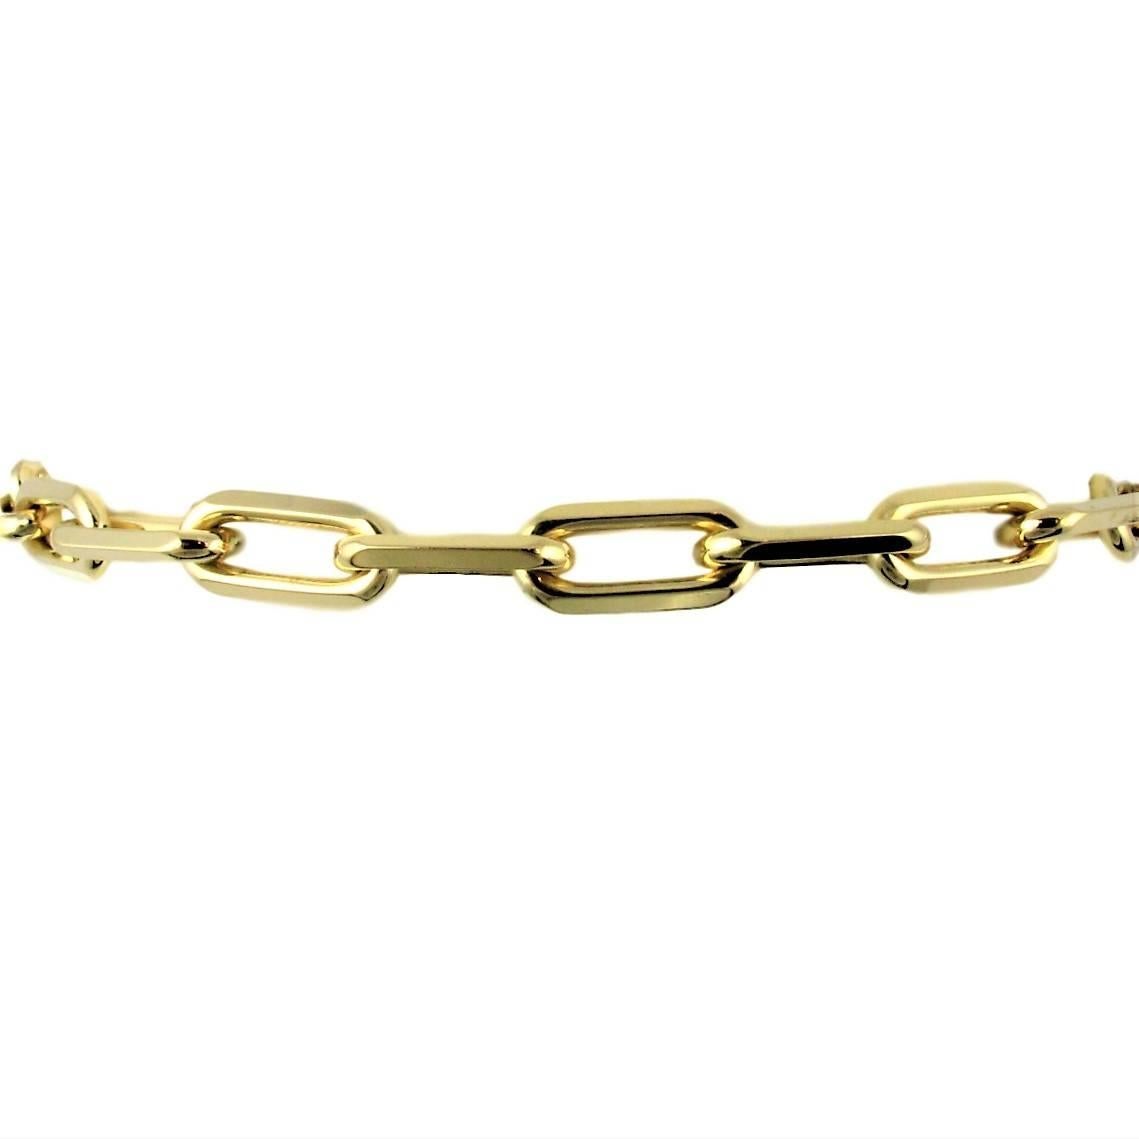 Classic oblong high polish shiny links with the sublime Cartier gold light reflections. 
Elegant. Feminine. 
18ct yellow Cartier gold links onto clasp. Signed Cartier. 
Cartier box.